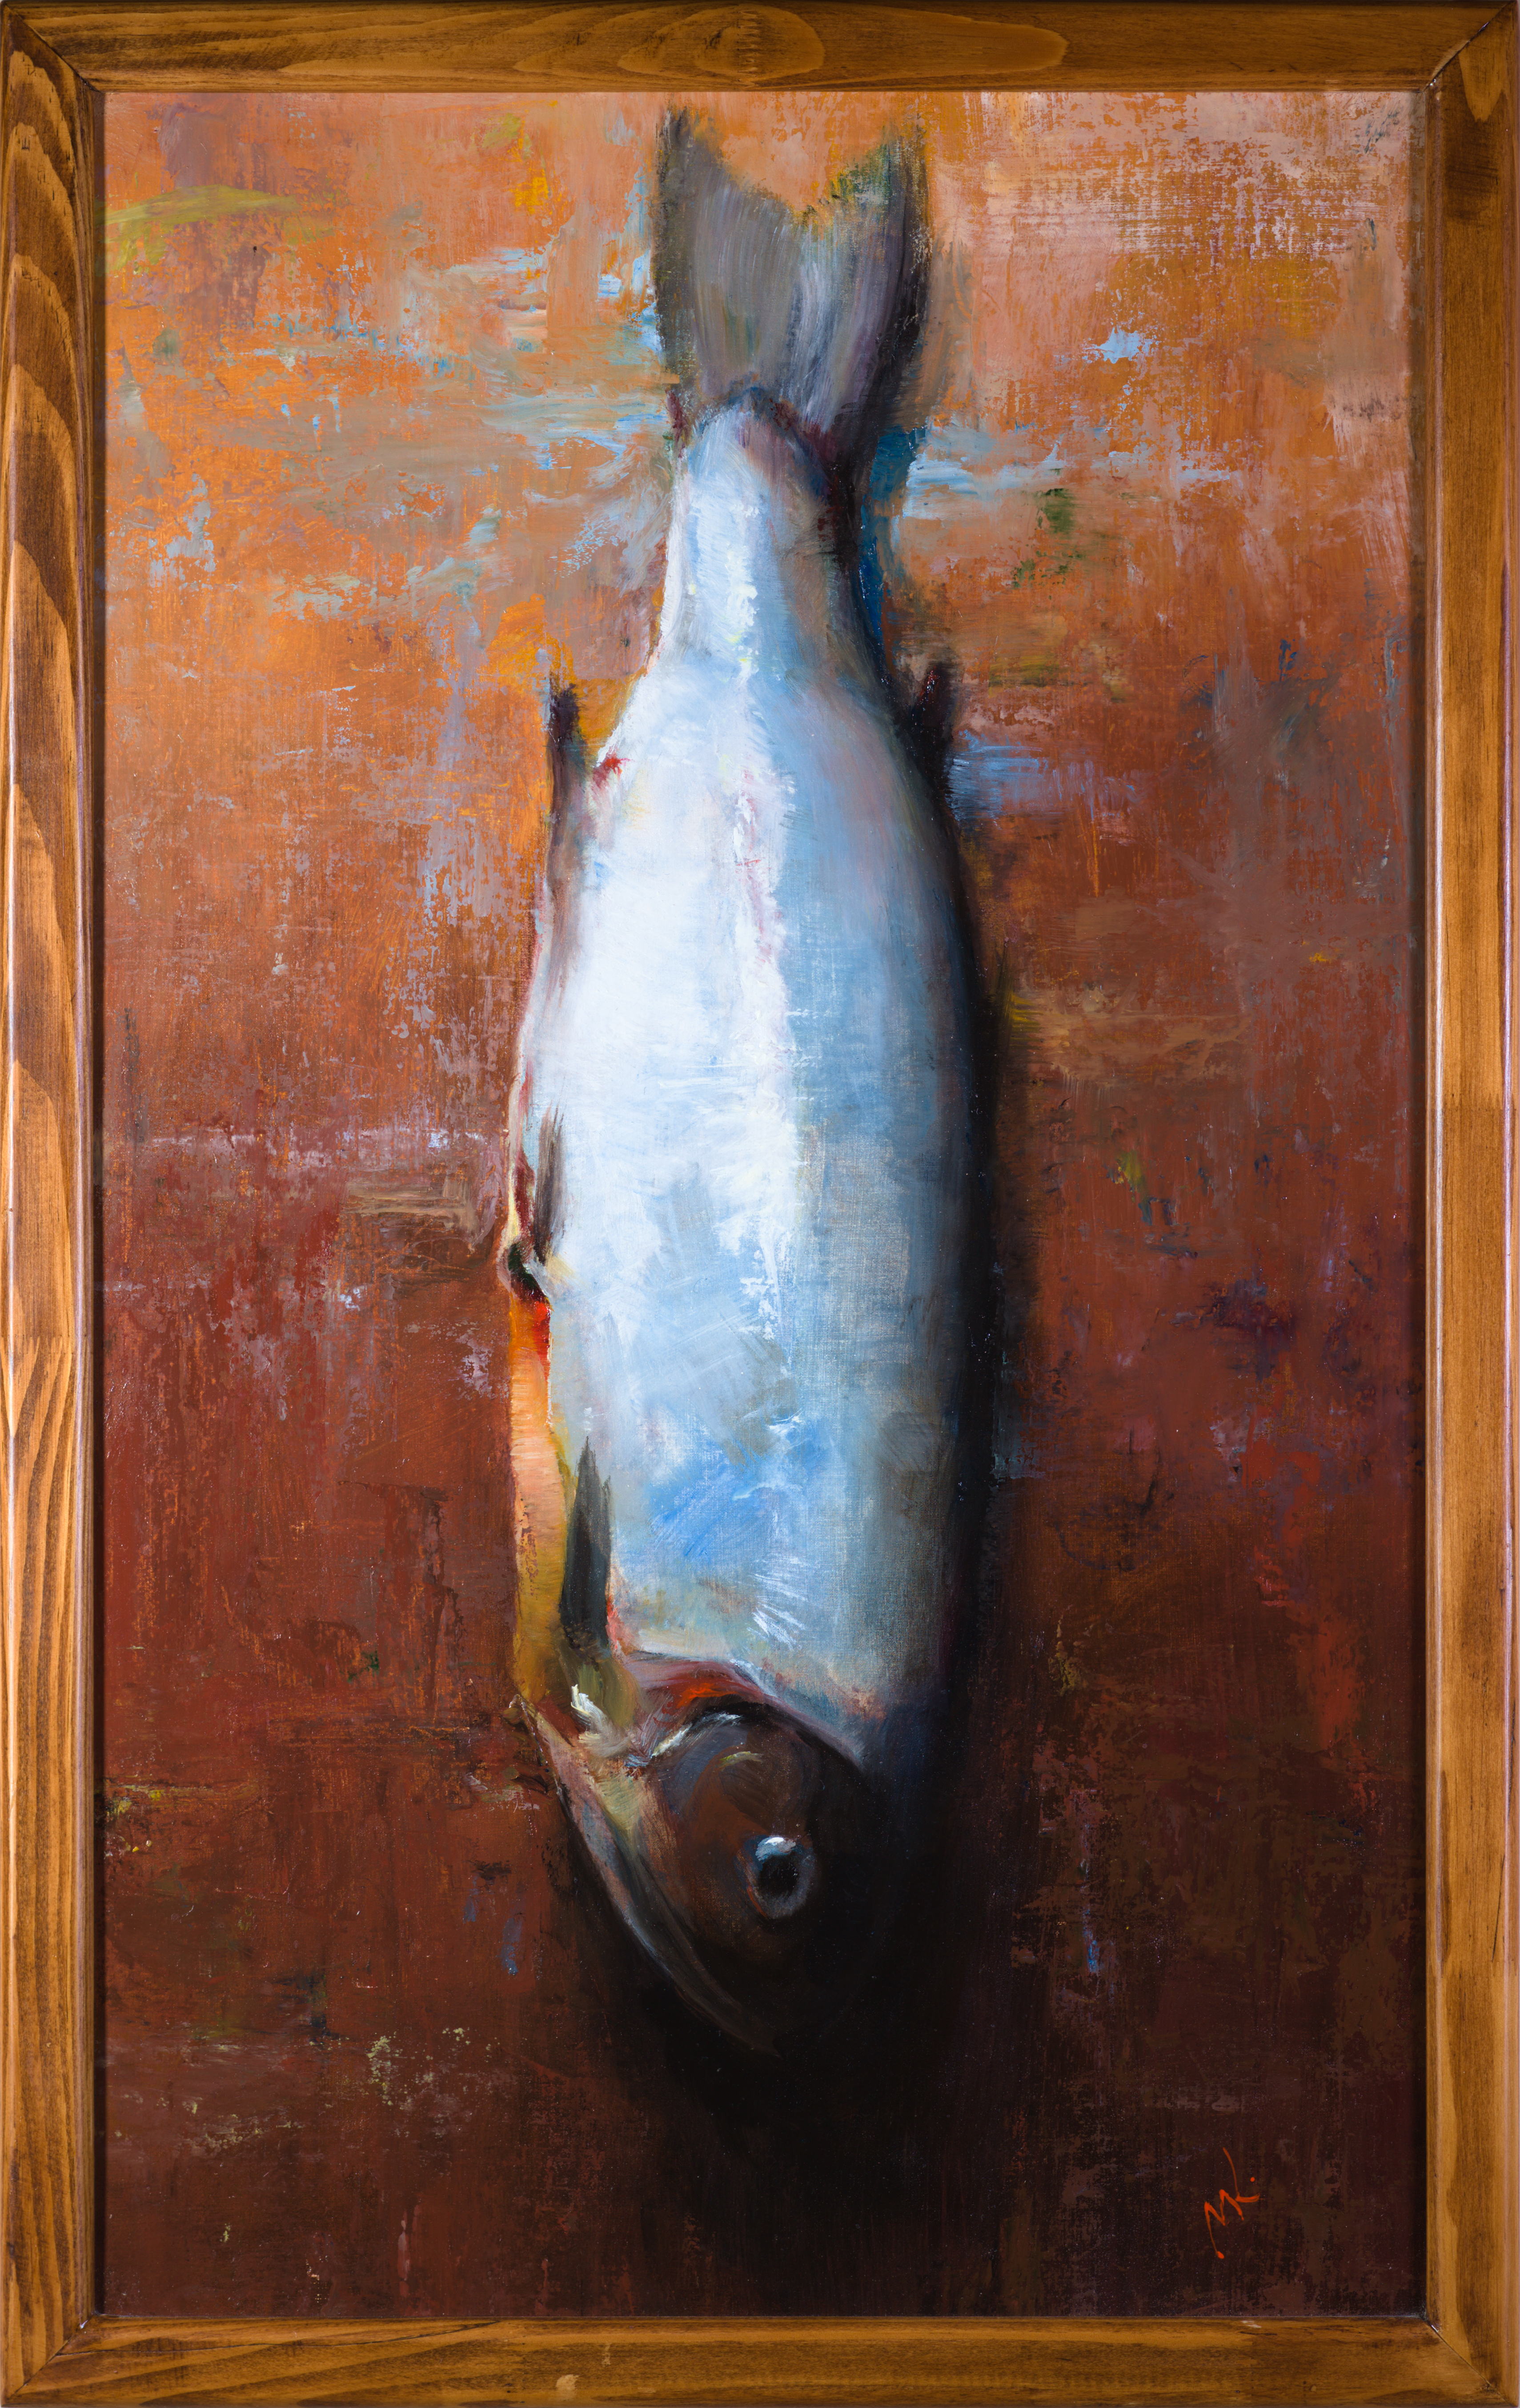 Mikhail Velavok: 'Sad Salty Fish', 2019 Oil Painting, Fish. Original oil painting on canvas glued on cardboard.  The artwork is being sold framed in natural light wood frame 51. 5x32. 5cm.  Dimensions of artwork without a frame are 49x30cm.  It is wired and ready for hanging.  fish, salty fish, dried fish, dead fish, object, still life, original oil painting, ...